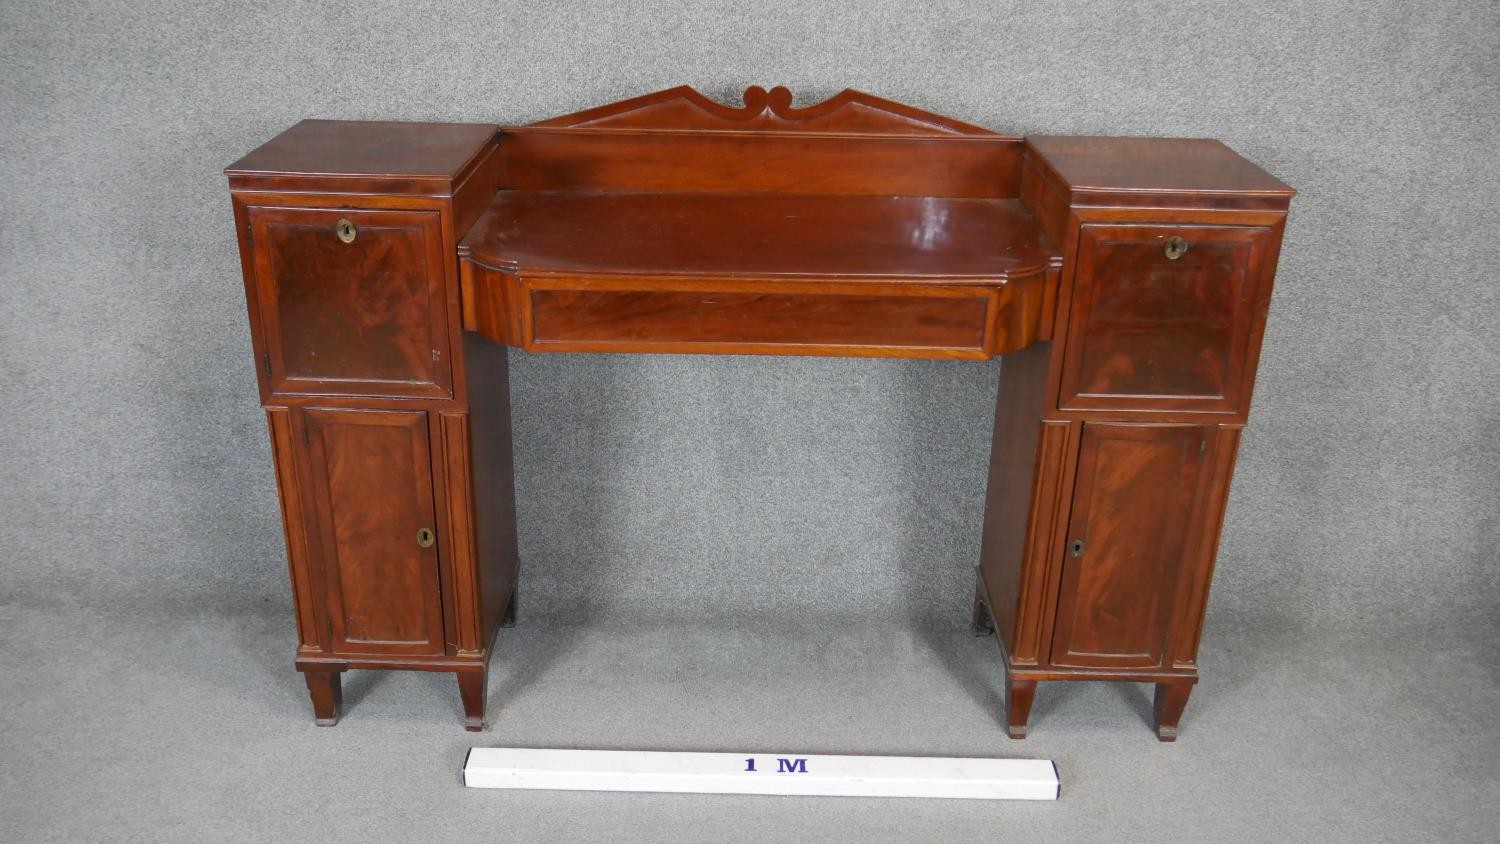 A Regency mahogany twin pedestal sideboard with flame mahogany panel doors flanked by pilasters on - Image 5 of 5